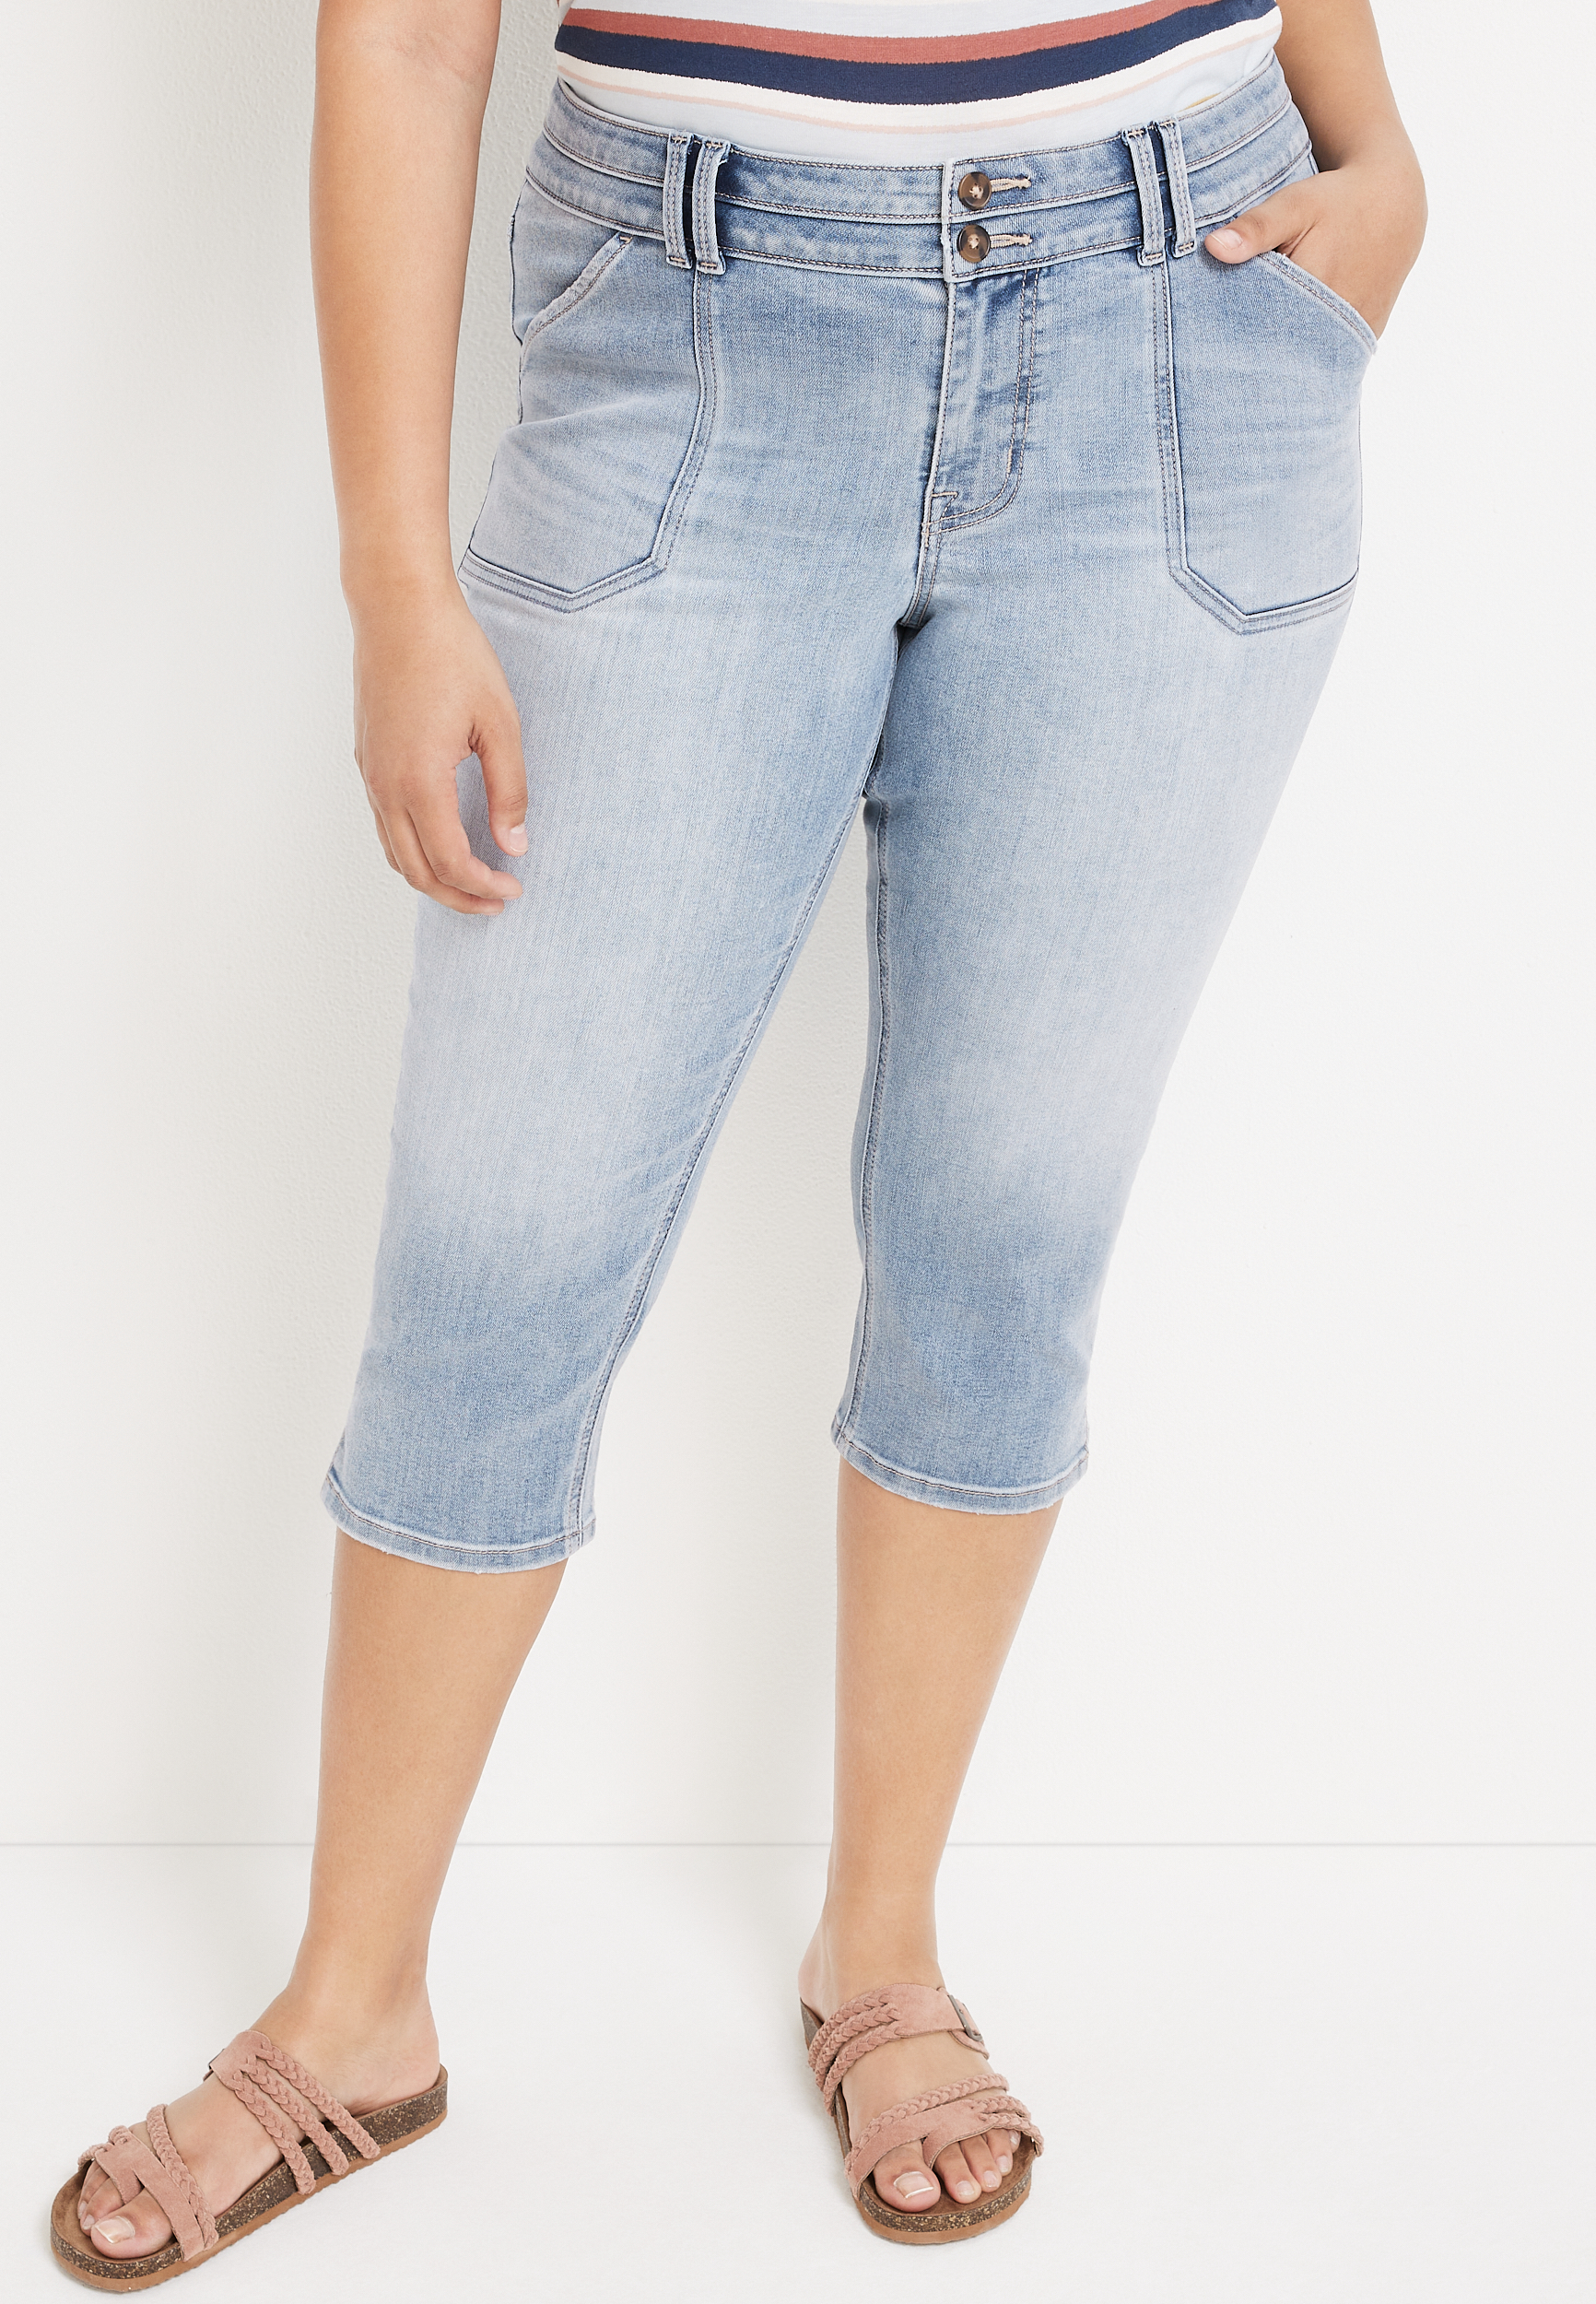 High Waist Plus Size Skinny Capris: Stretchy Knee Length Mom Jeans Short  Length For Women, Perfect For Summer 210428 From Bai06, $20.35